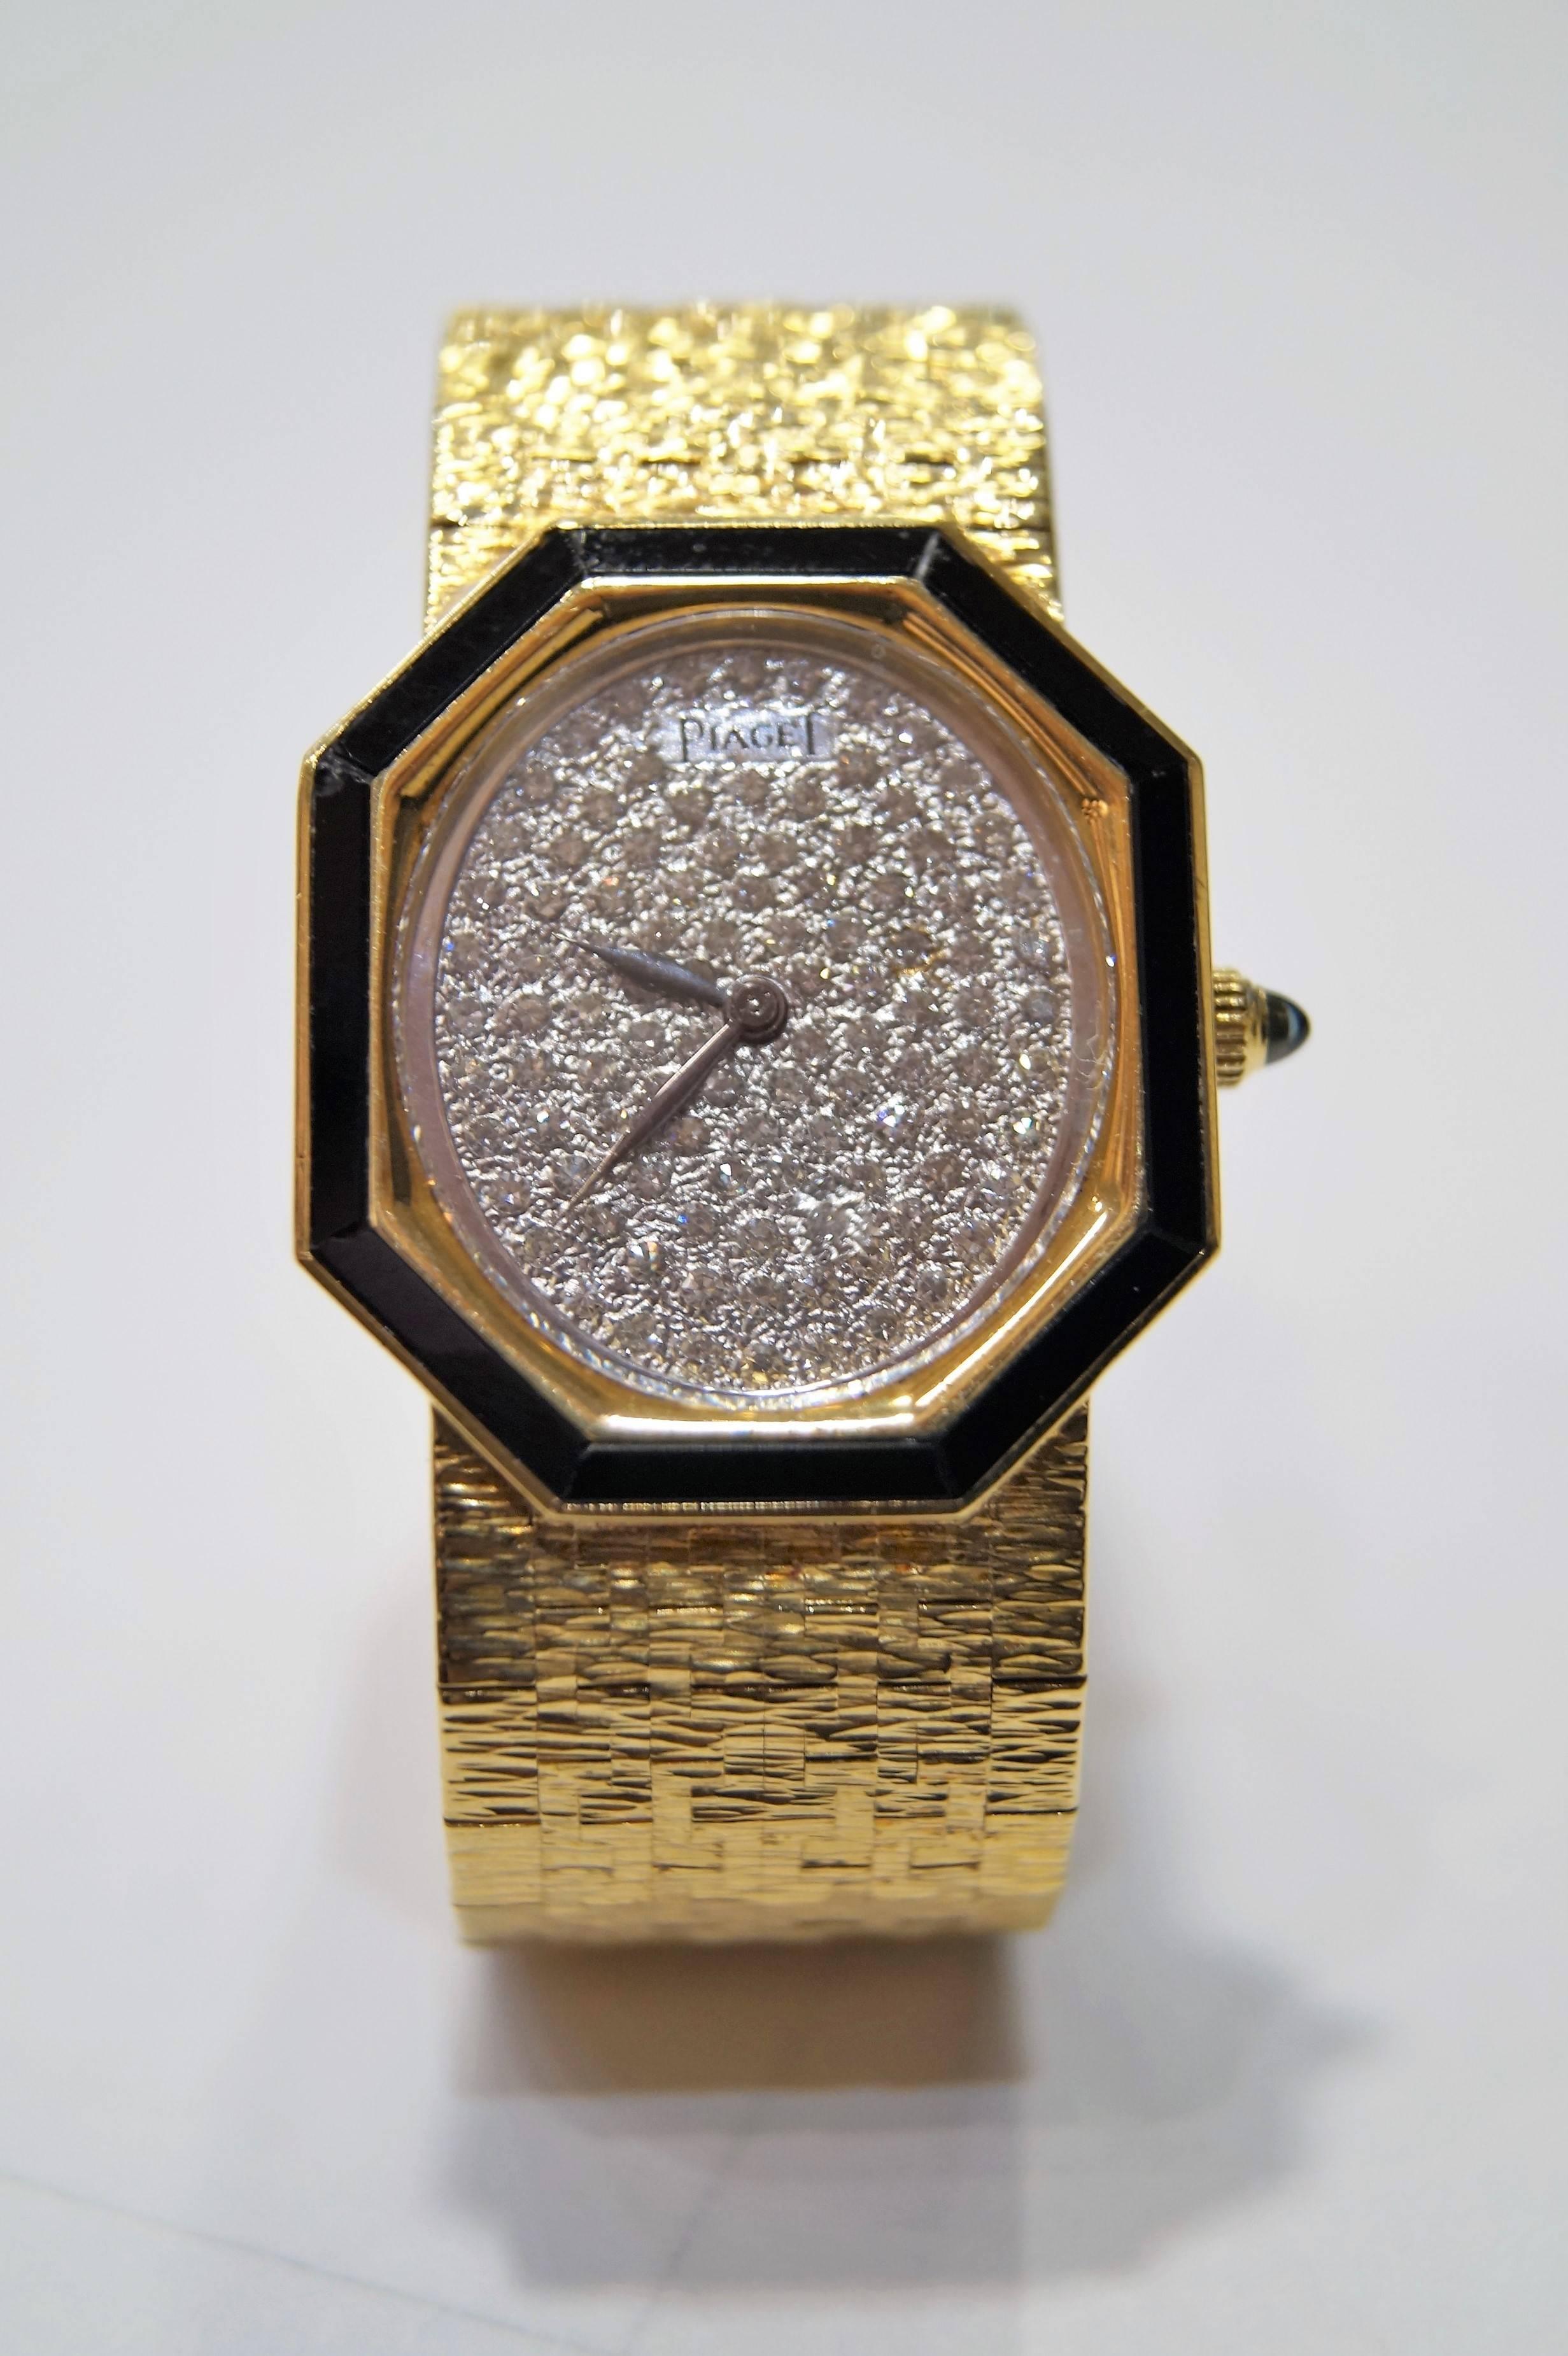 This classic circa 1970's 18k Yellow Gold Piaget Ladies Watch has a bark style bracelet with a black onyx octagon bezel and a pave diamond dial. The watch has 17 Jewel Swiss movement